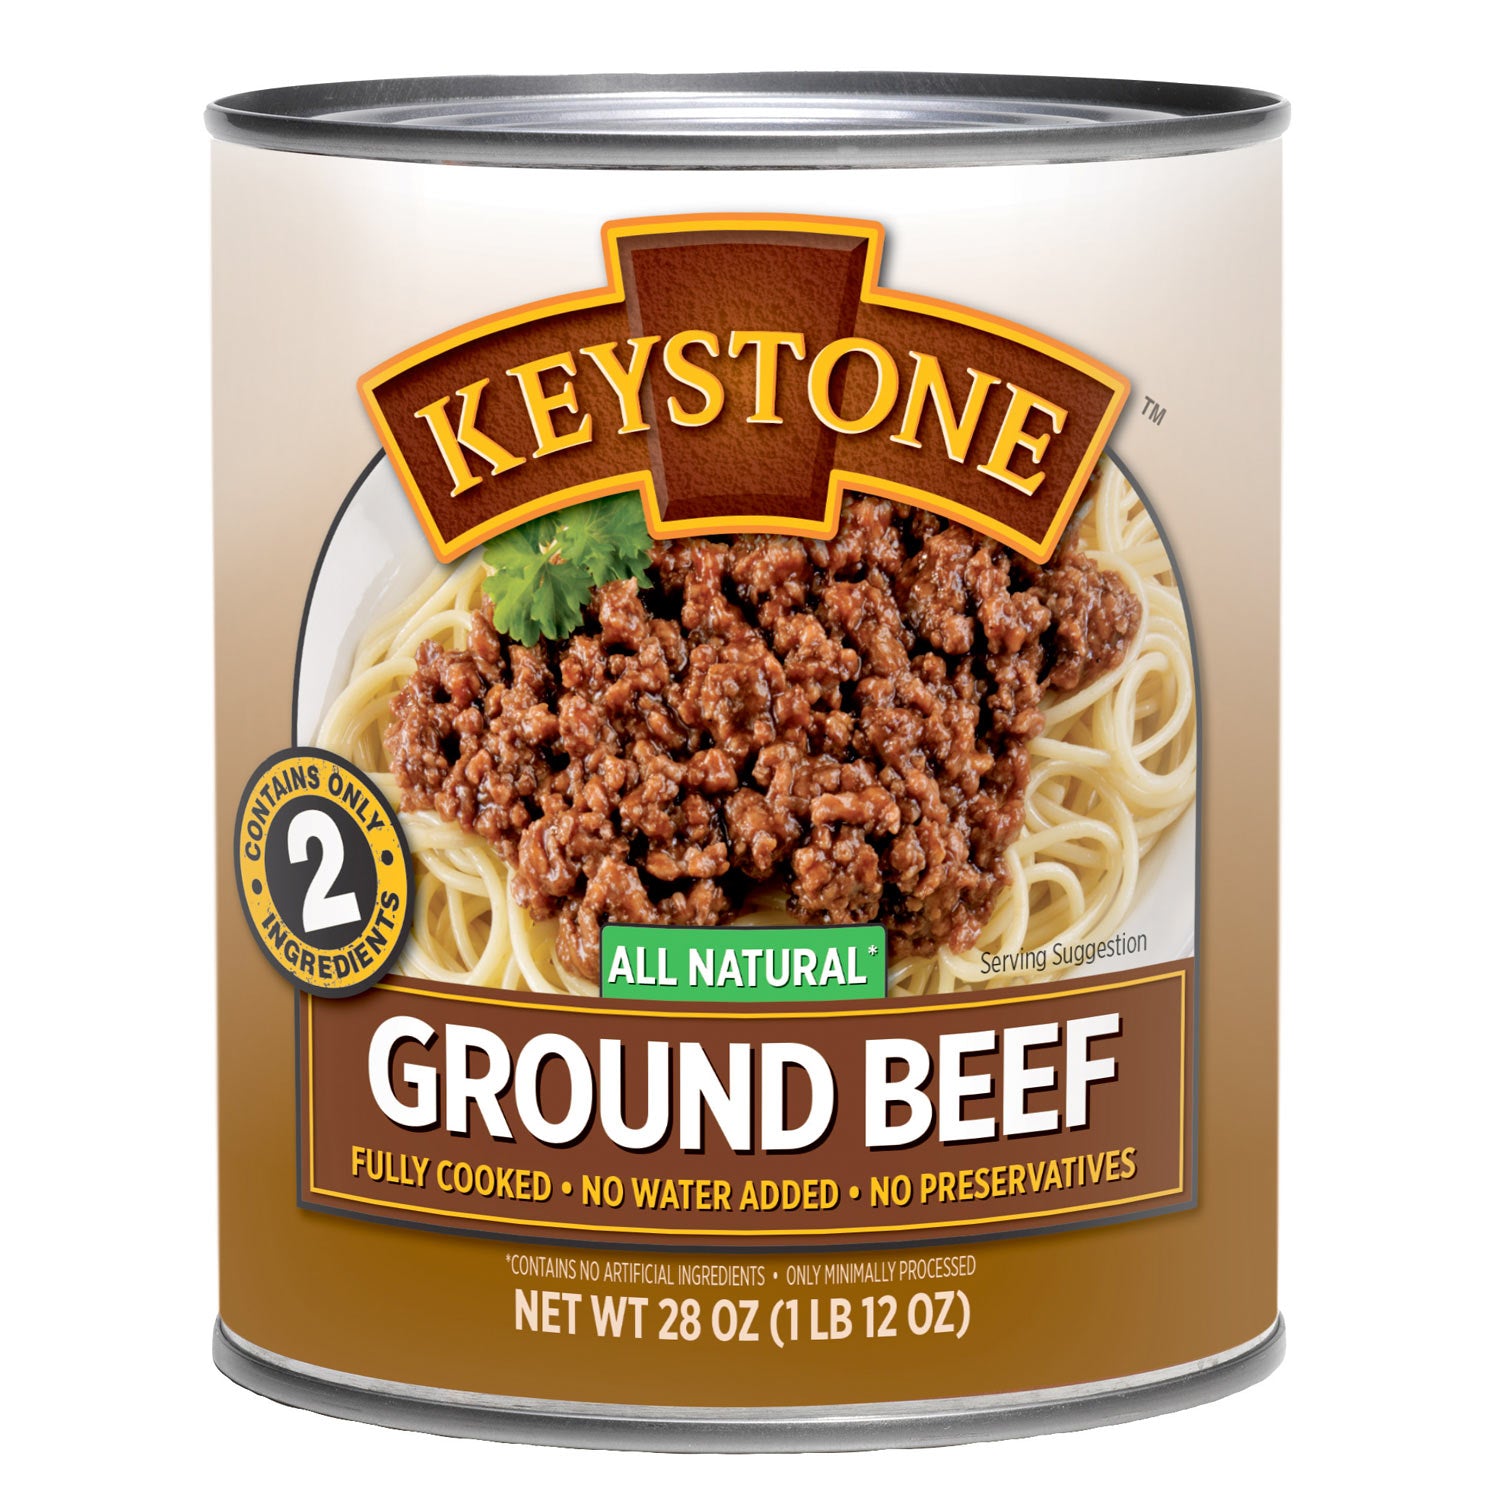 All Natural Ground Beef (28 oz / 12 cans per case) – Keystone Meats